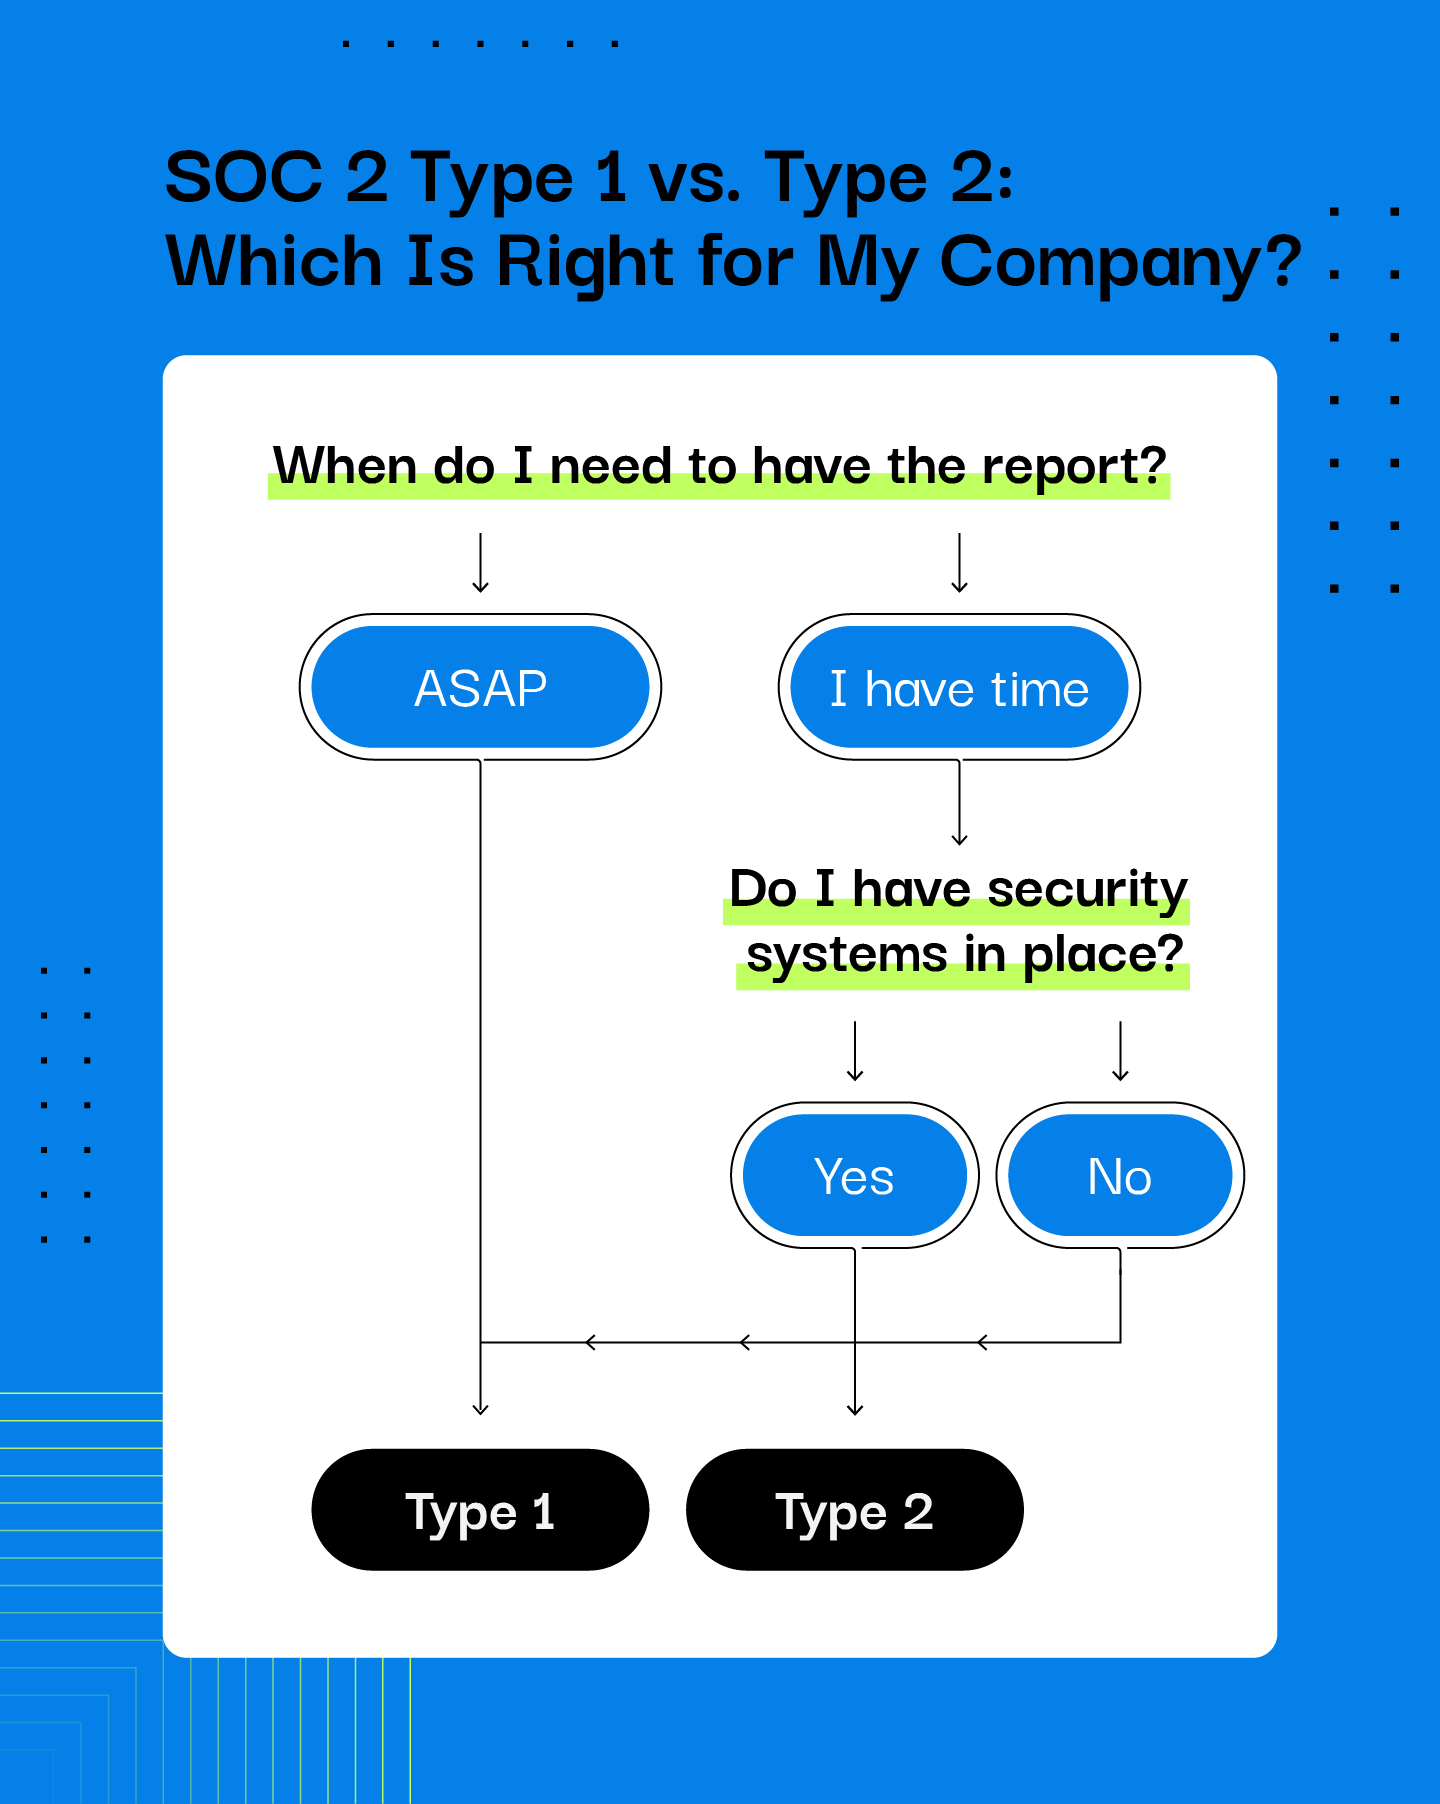 Which type of SOC 2 report is right for my company?